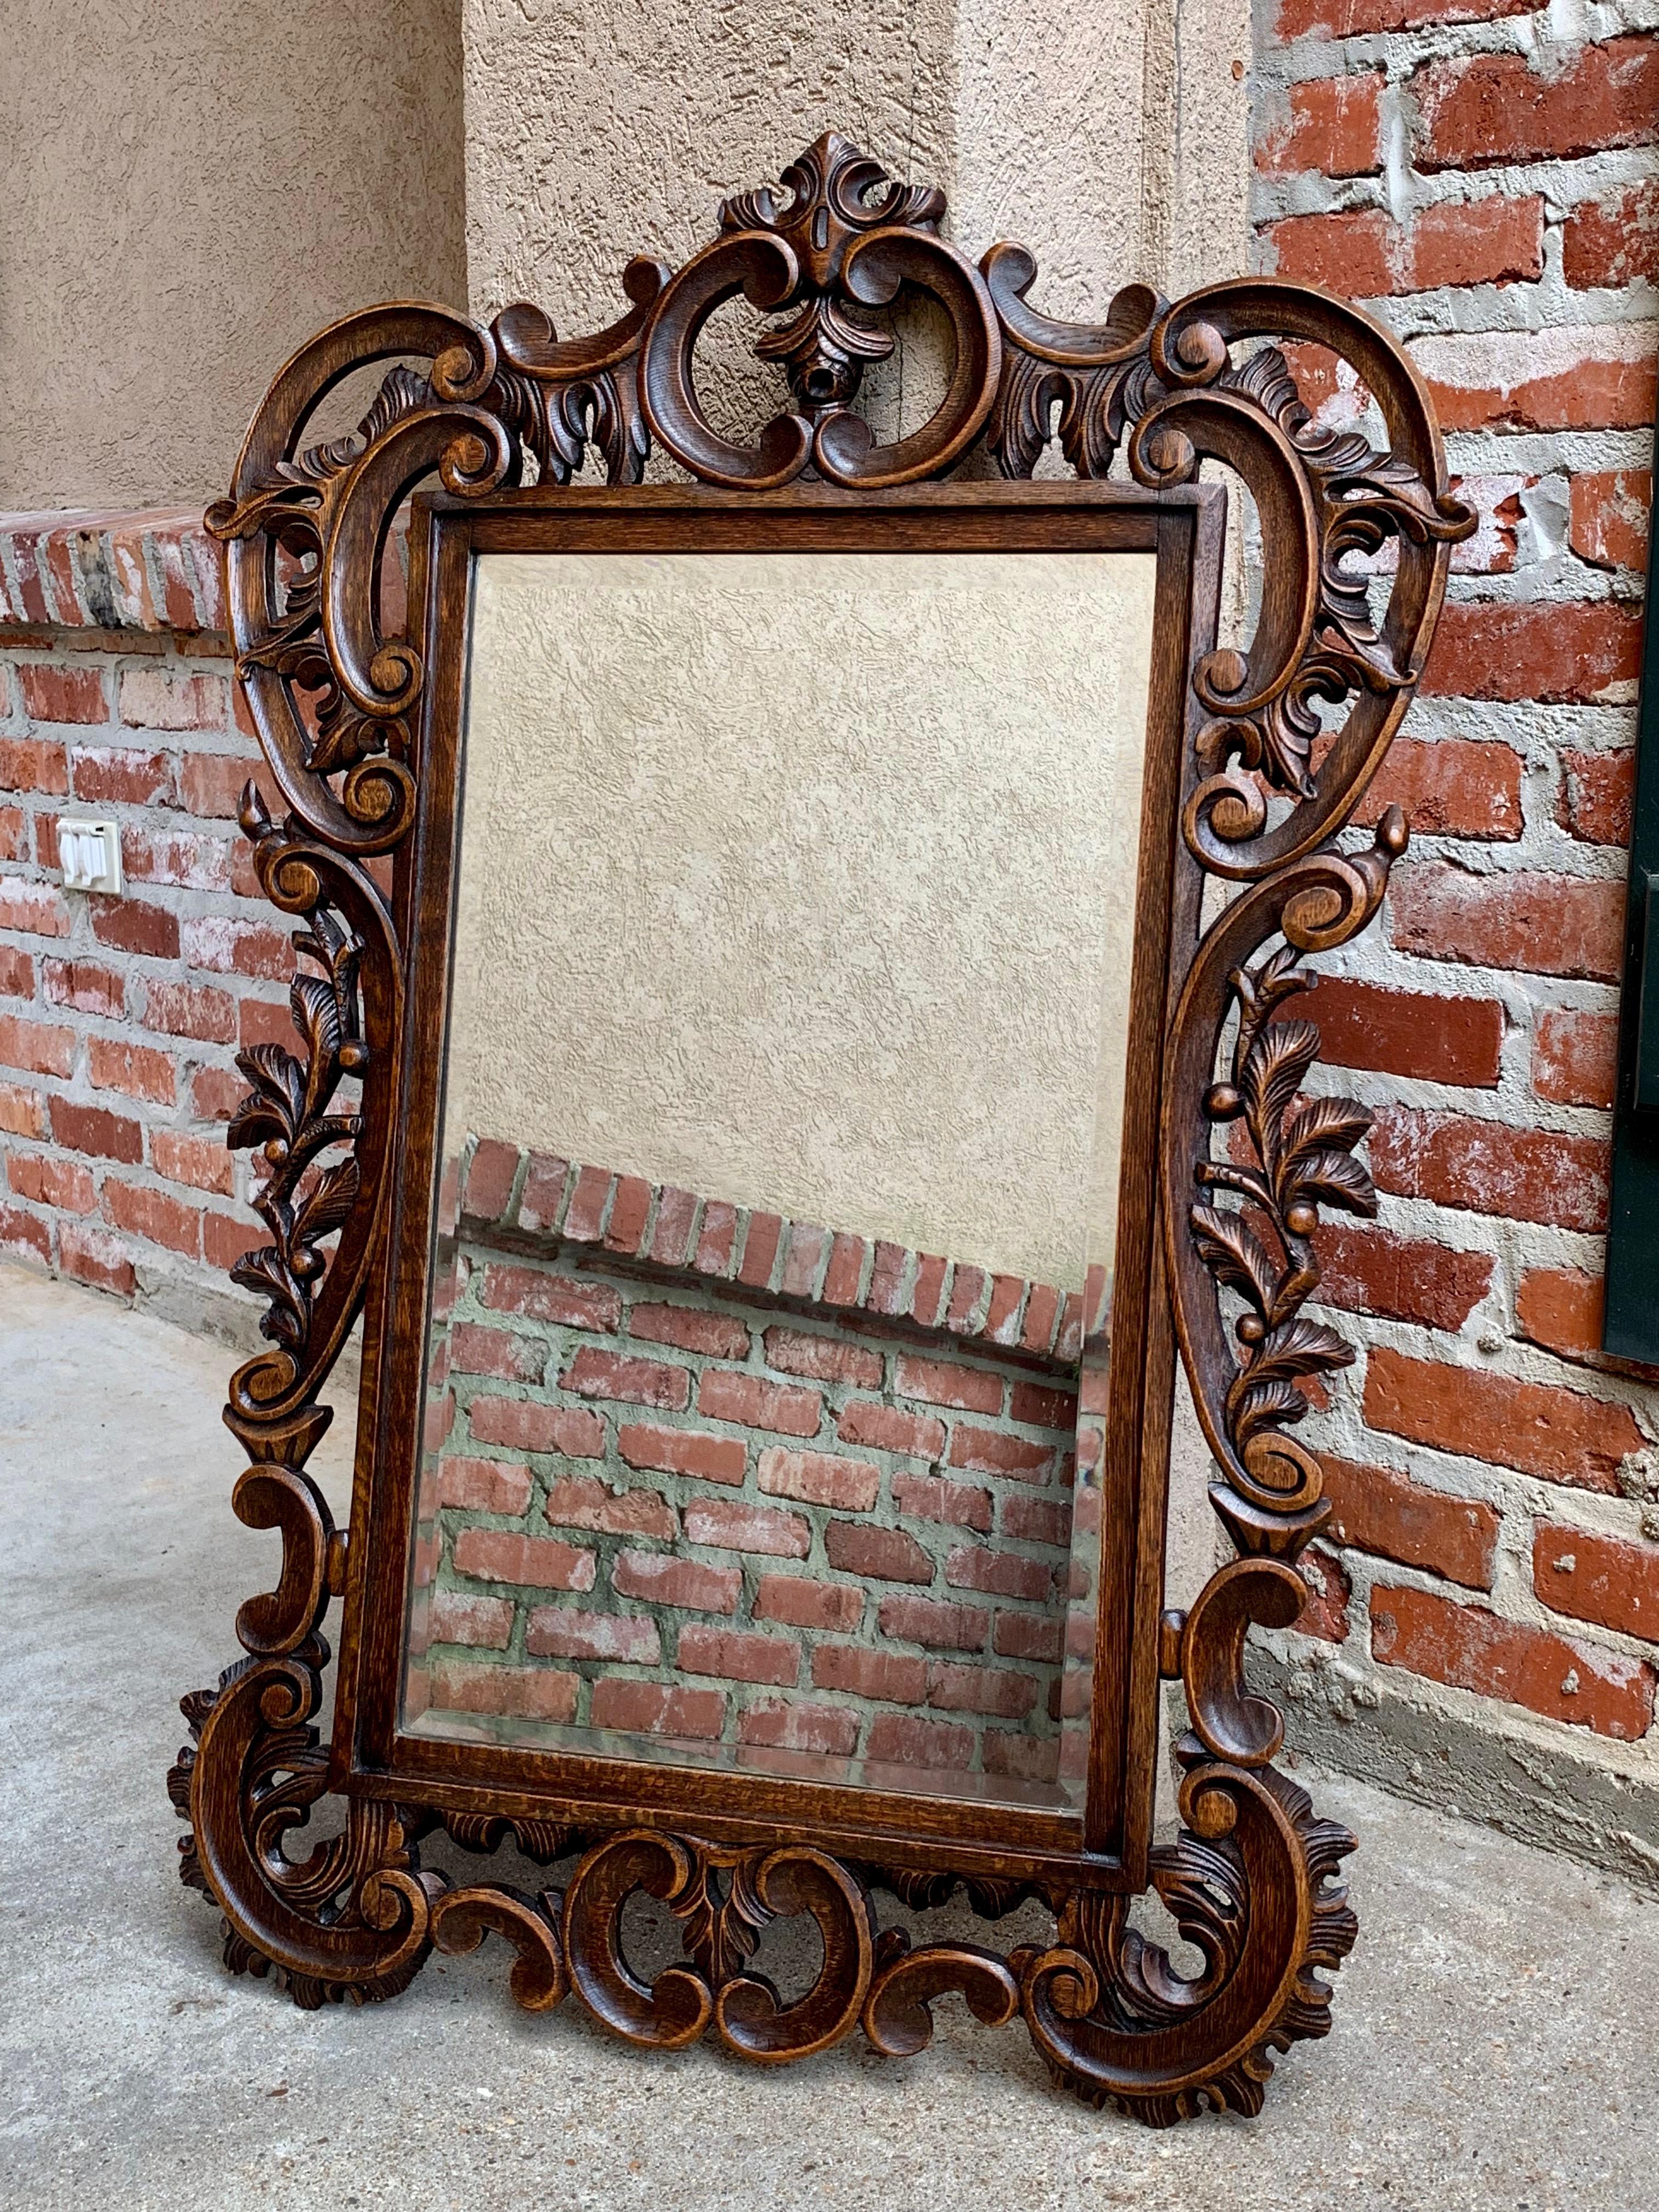 Direct from France, a fabulous antique French oak frame wall mirror with exquisite hand carved details. From the top of the huge open carved crown, down the sides completely embellished with scrolls and foliage, all the way to the open carved